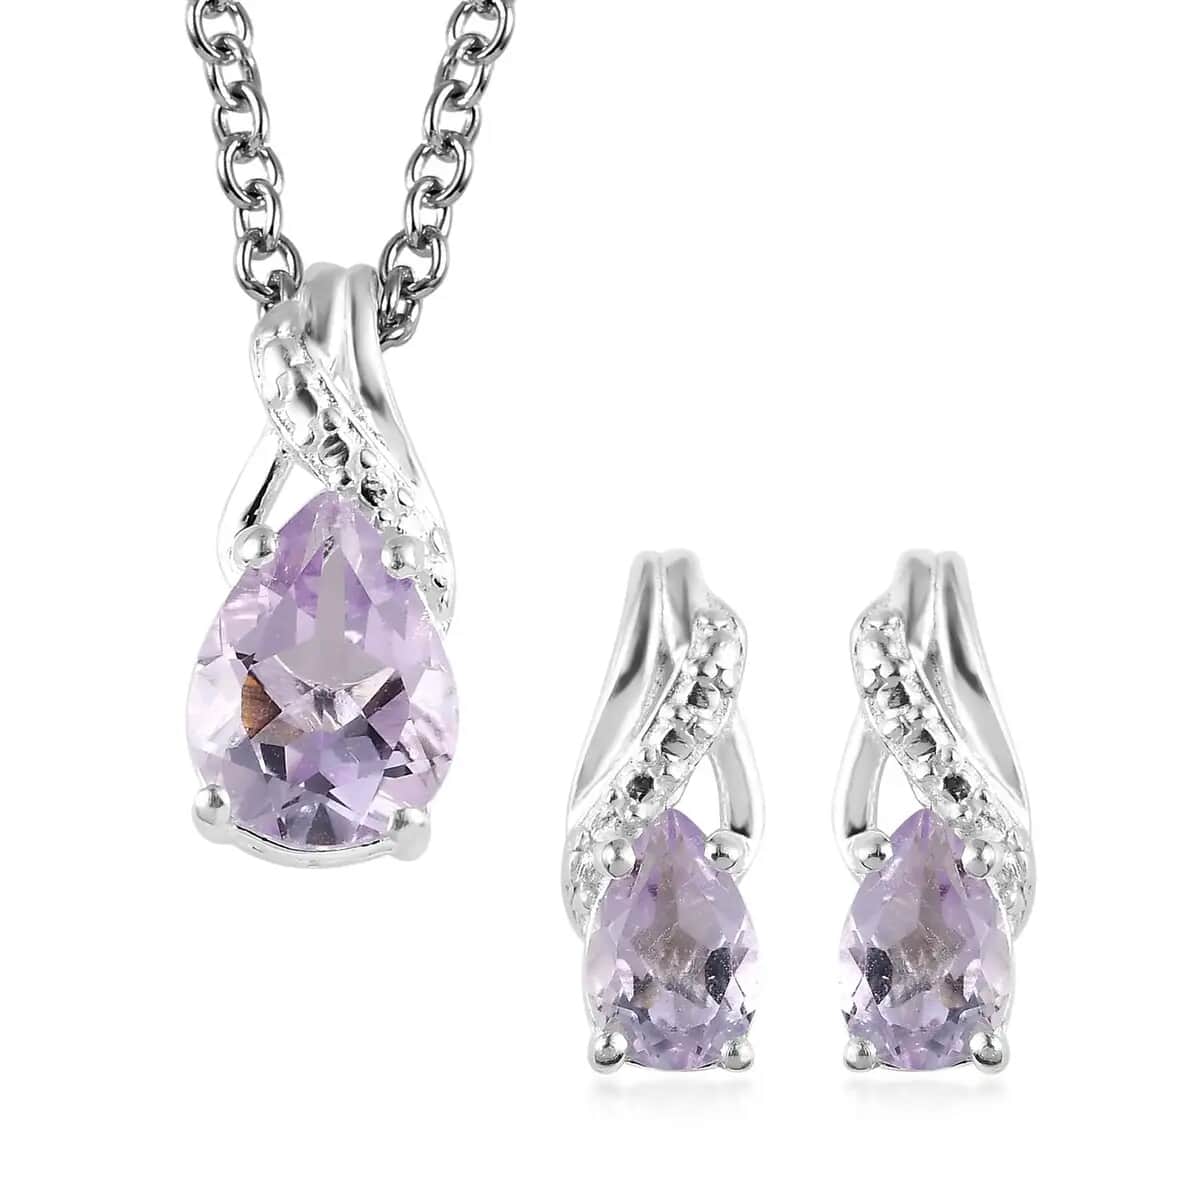 Rose De France Amethyst Earrings and Pendant Necklace Jewelry Set, Sterling Silver and Stainless Steel Jewelry Set, Set of Amethyst Earrings and Amethyst Pendant Necklace 1.65 ctw image number 0